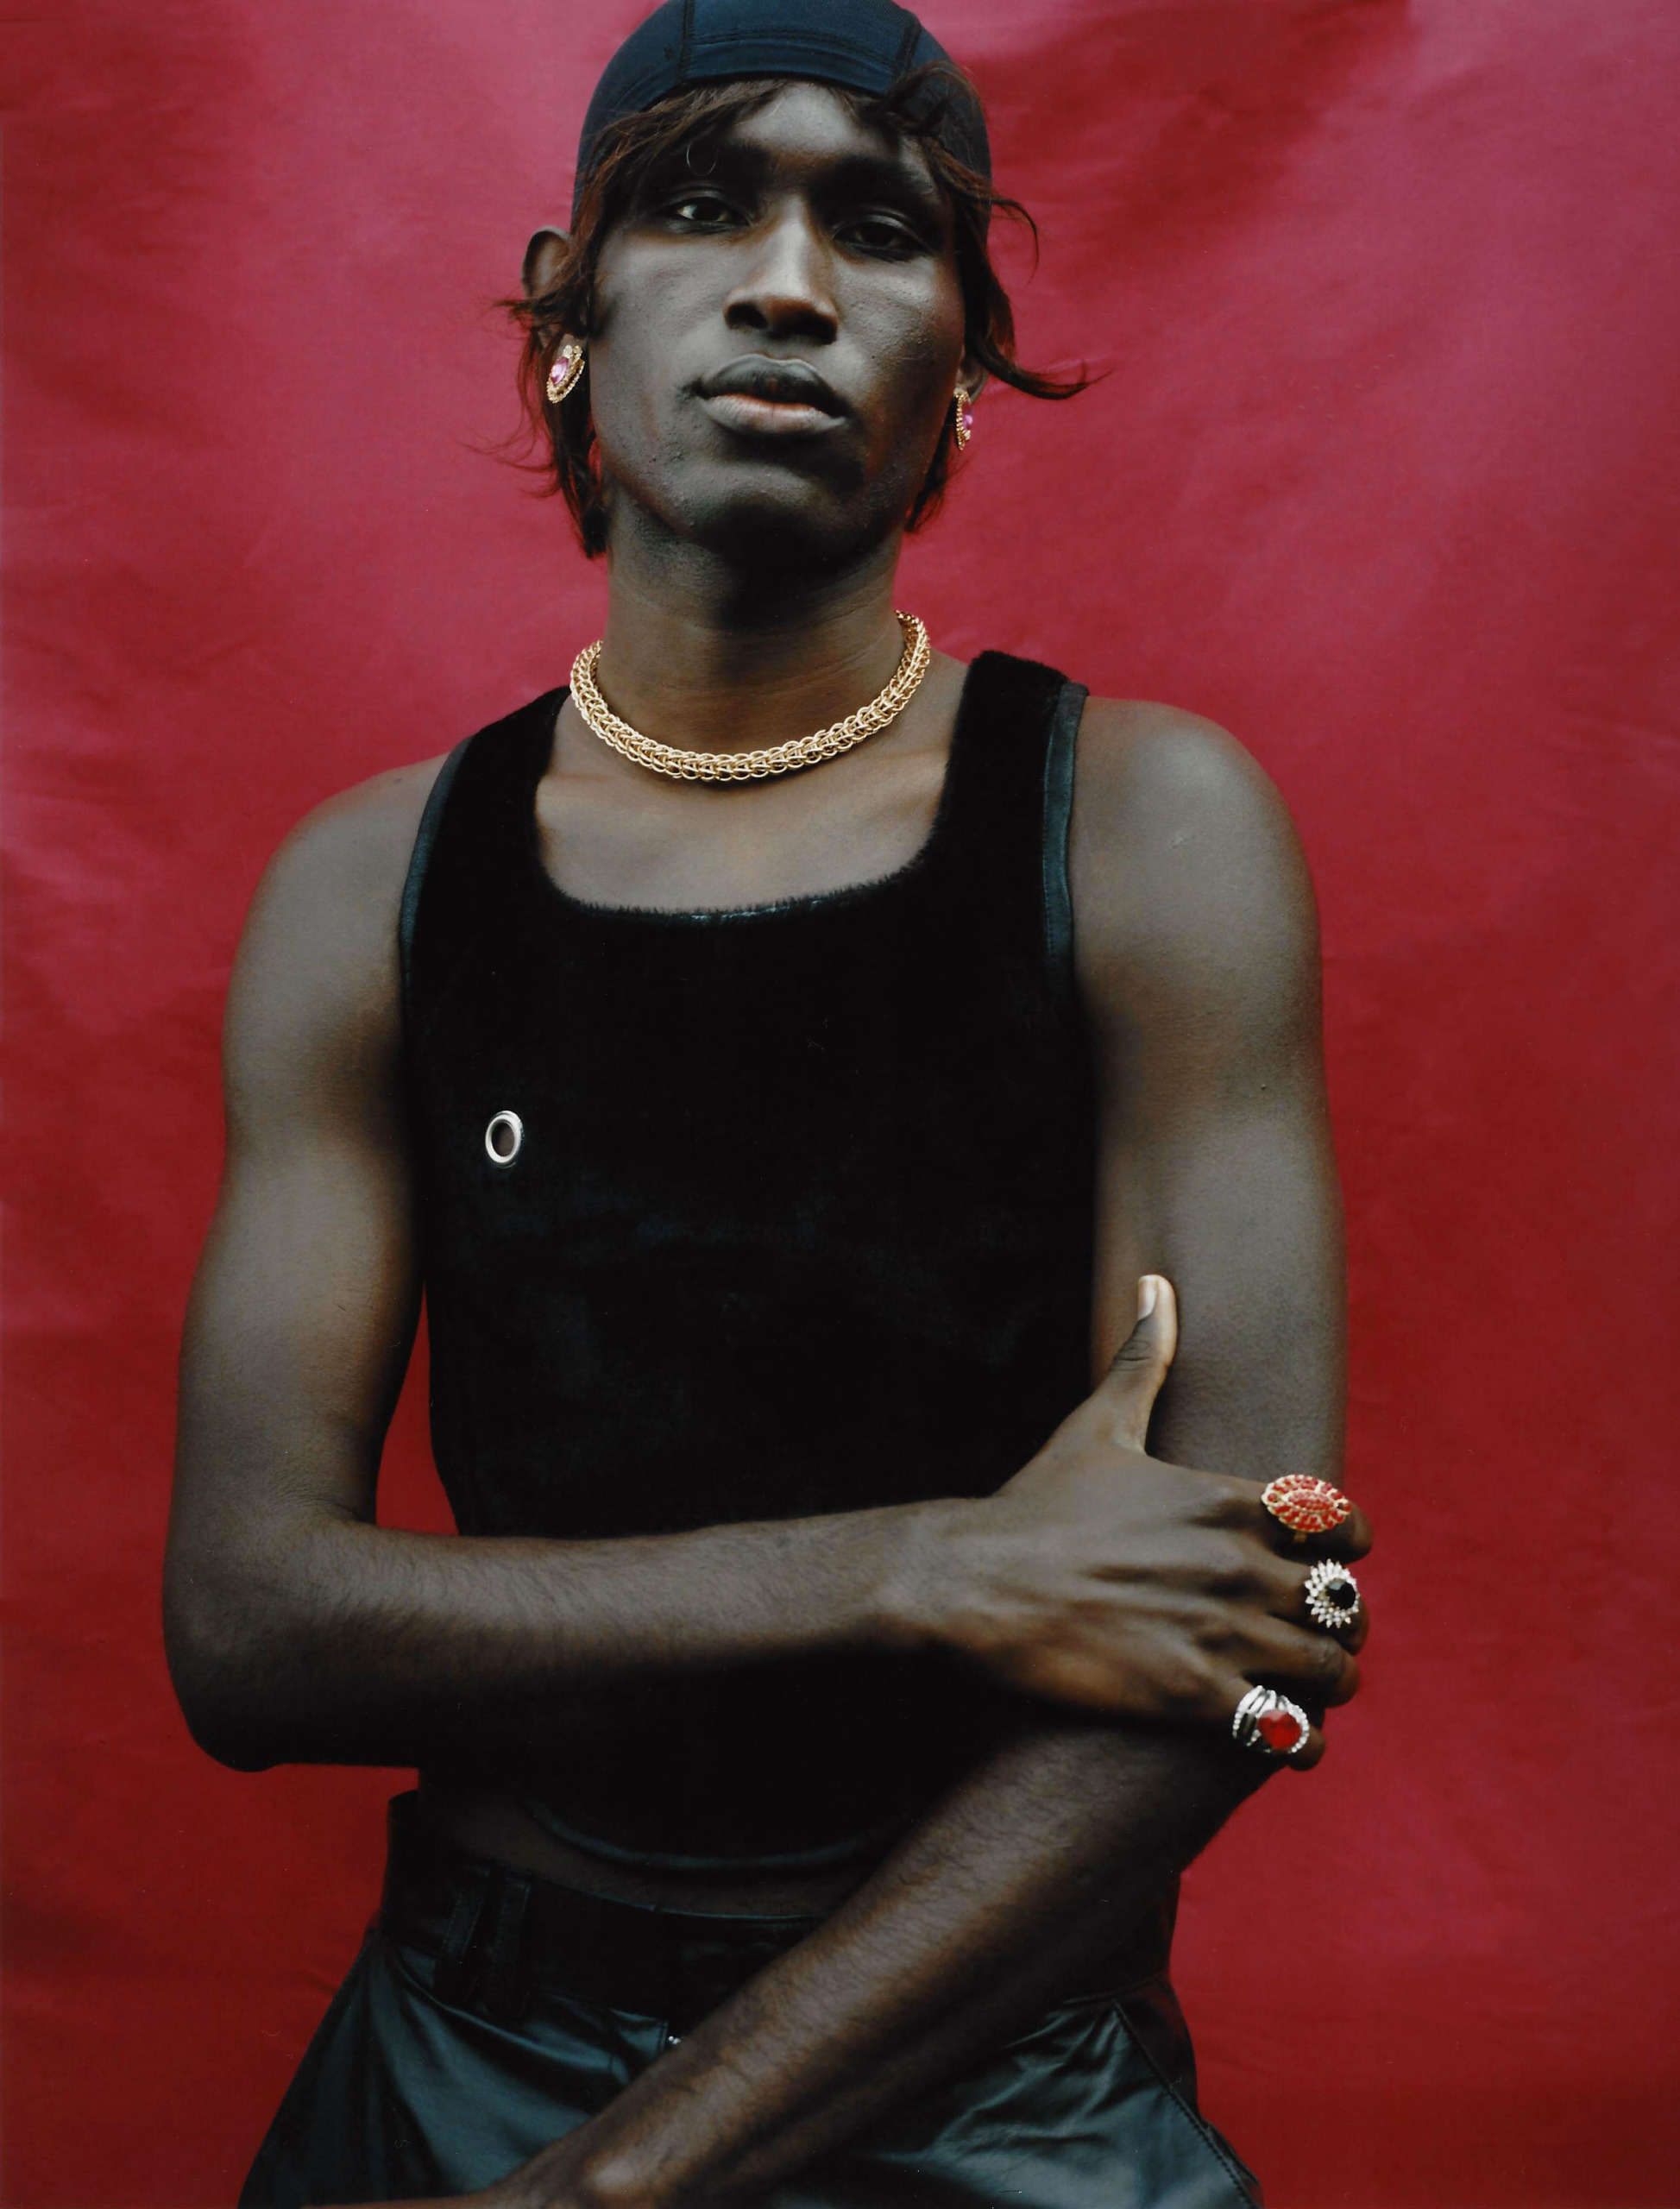 A man wearing a black tank top, black pants, and three red, black, and silver rings poses in front of a red background.